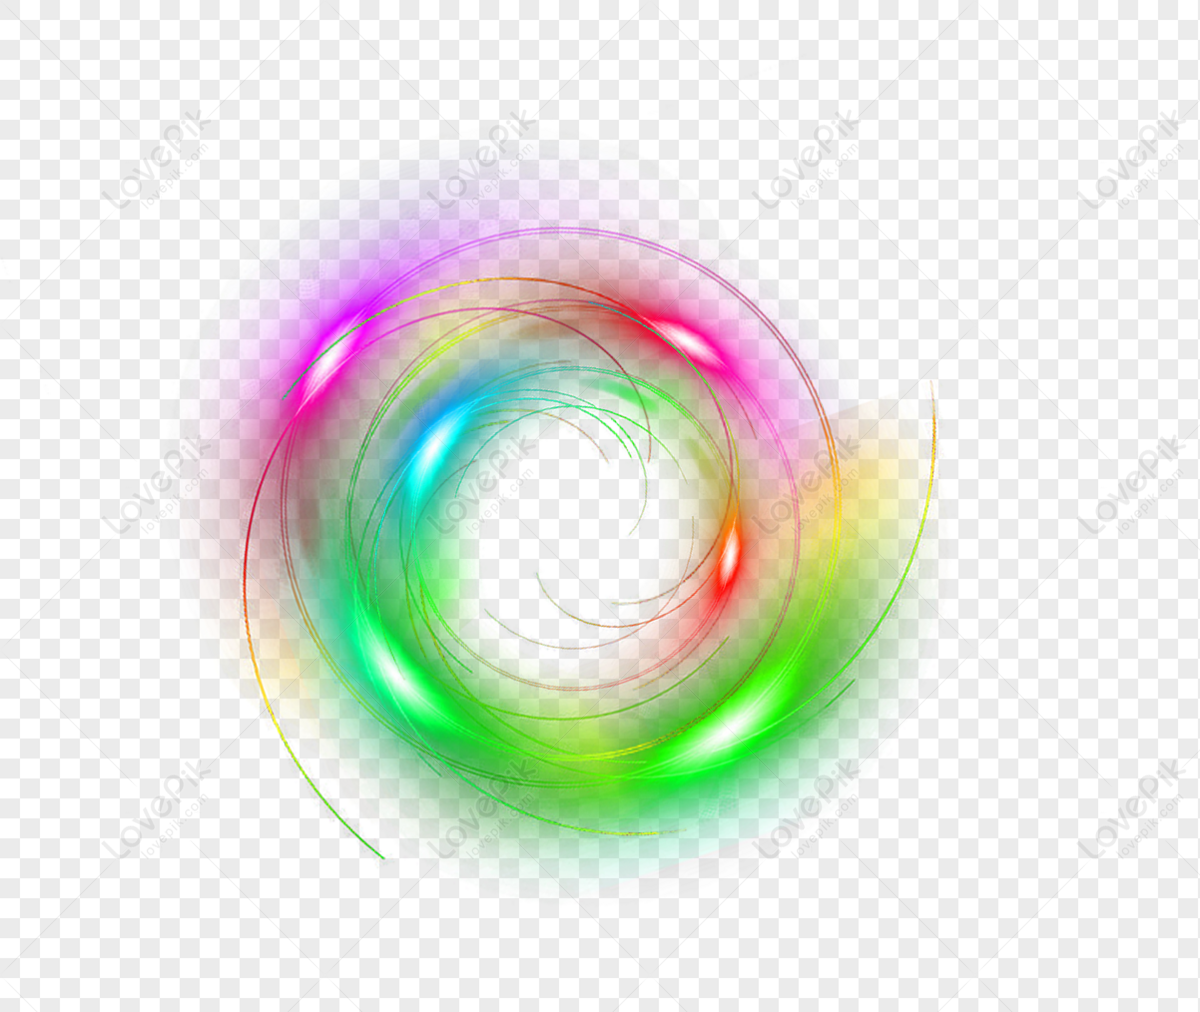 Color Ring Effect Free PNG And Clipart Image For Free Download - Lovepik |  401455519